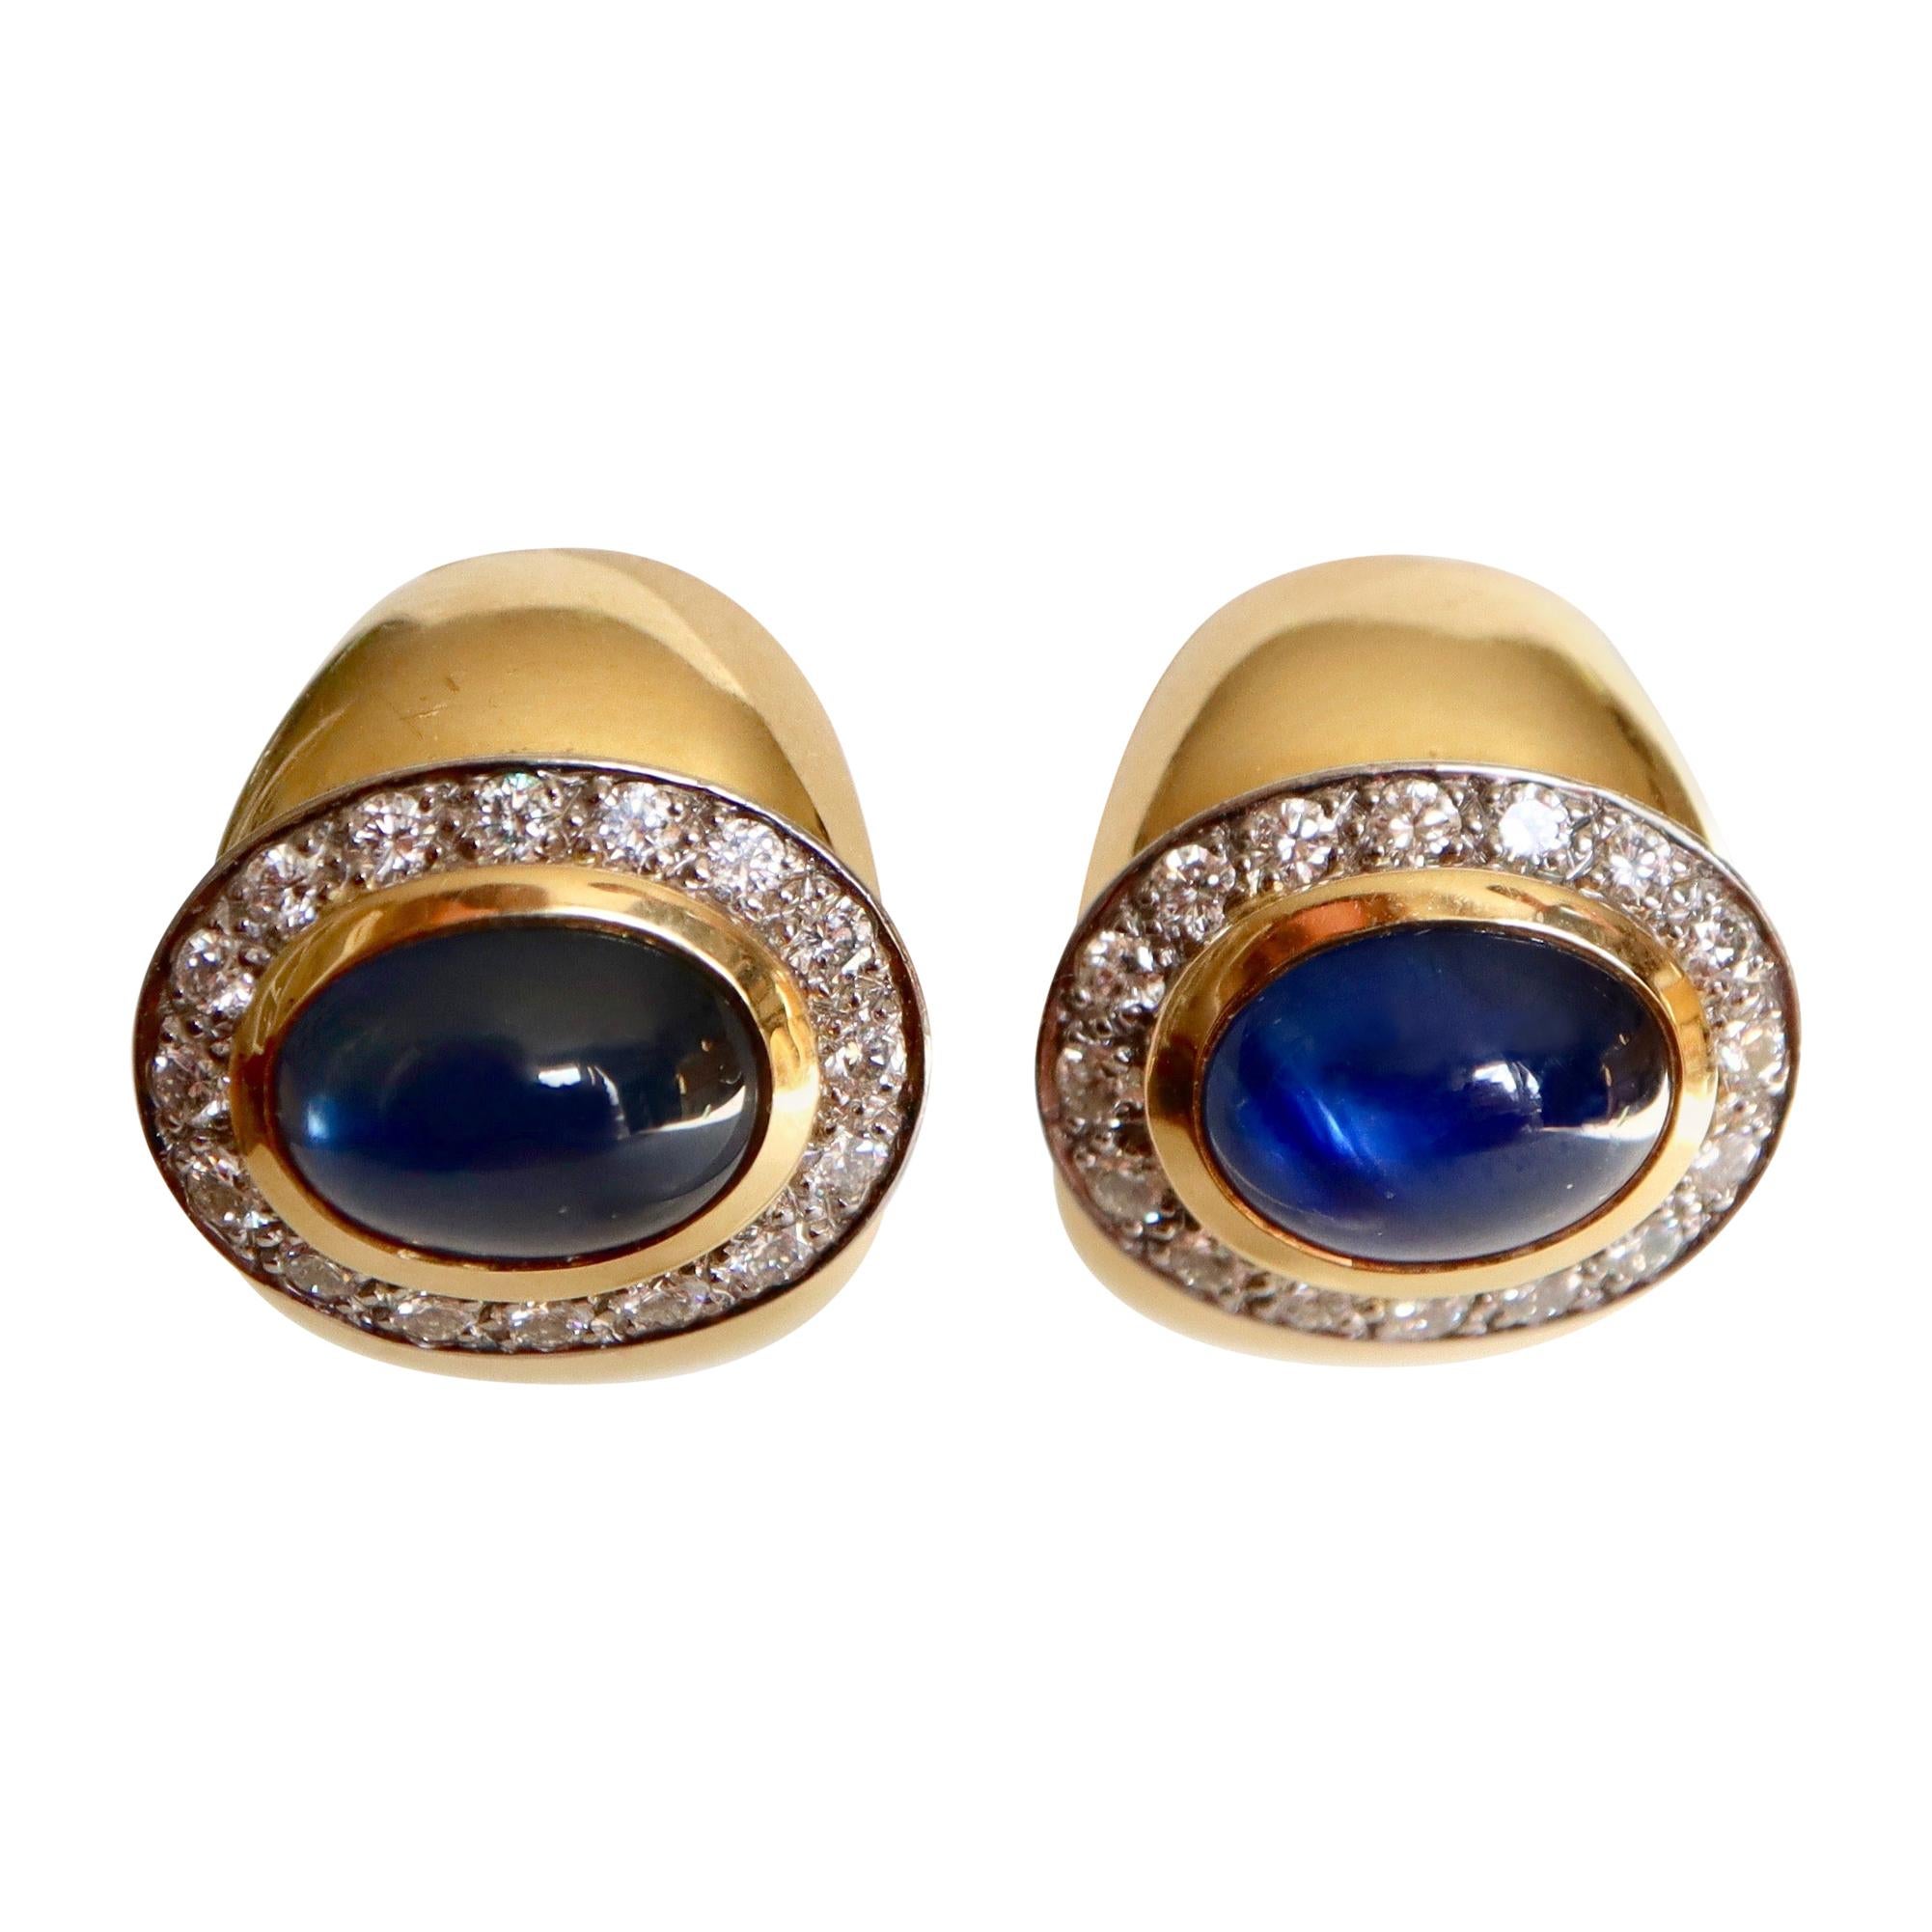 Wempe 18 Karat Yellow Gold and White Gold Earrings Set with Cabochon Sapphires